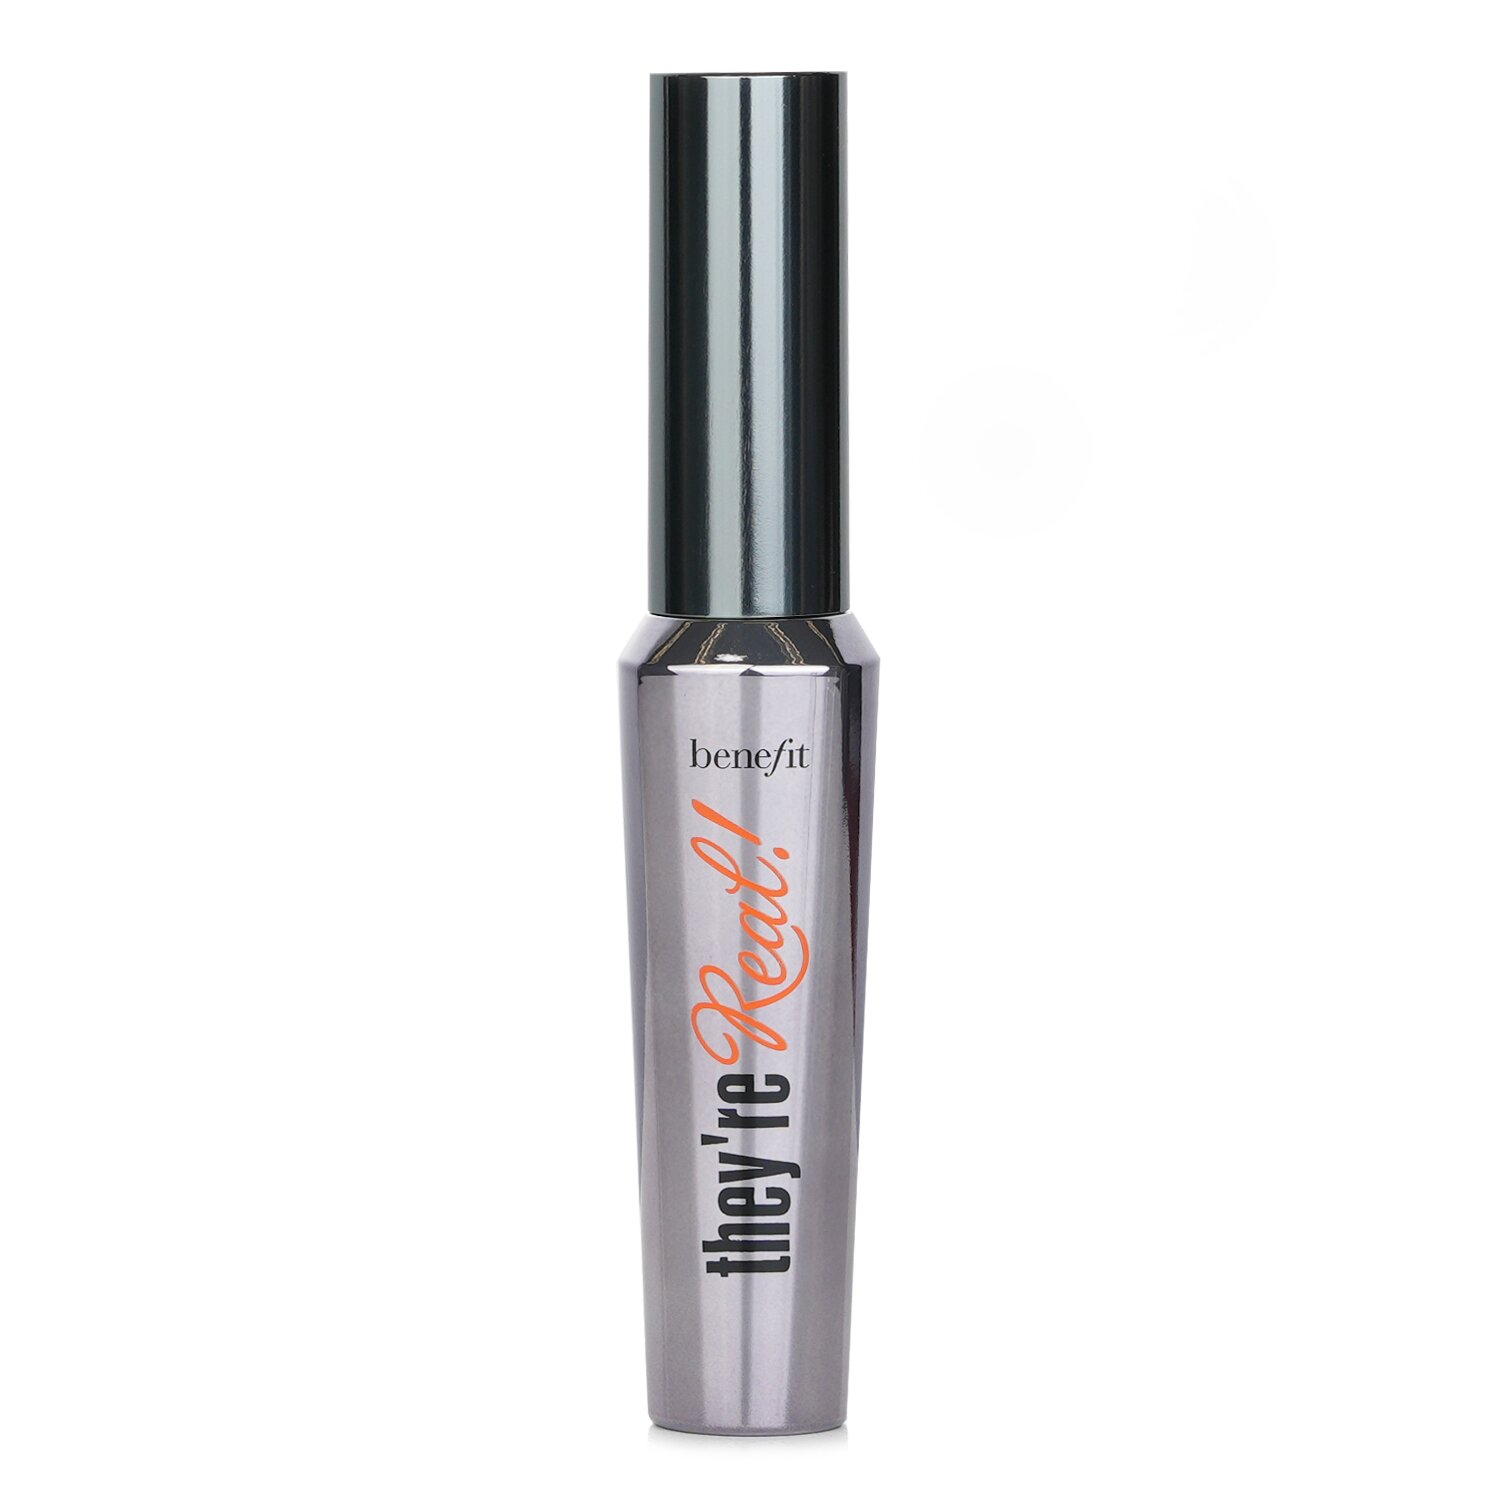 Benefit They're Real Beyond Mascara 8.5g/0.3oz